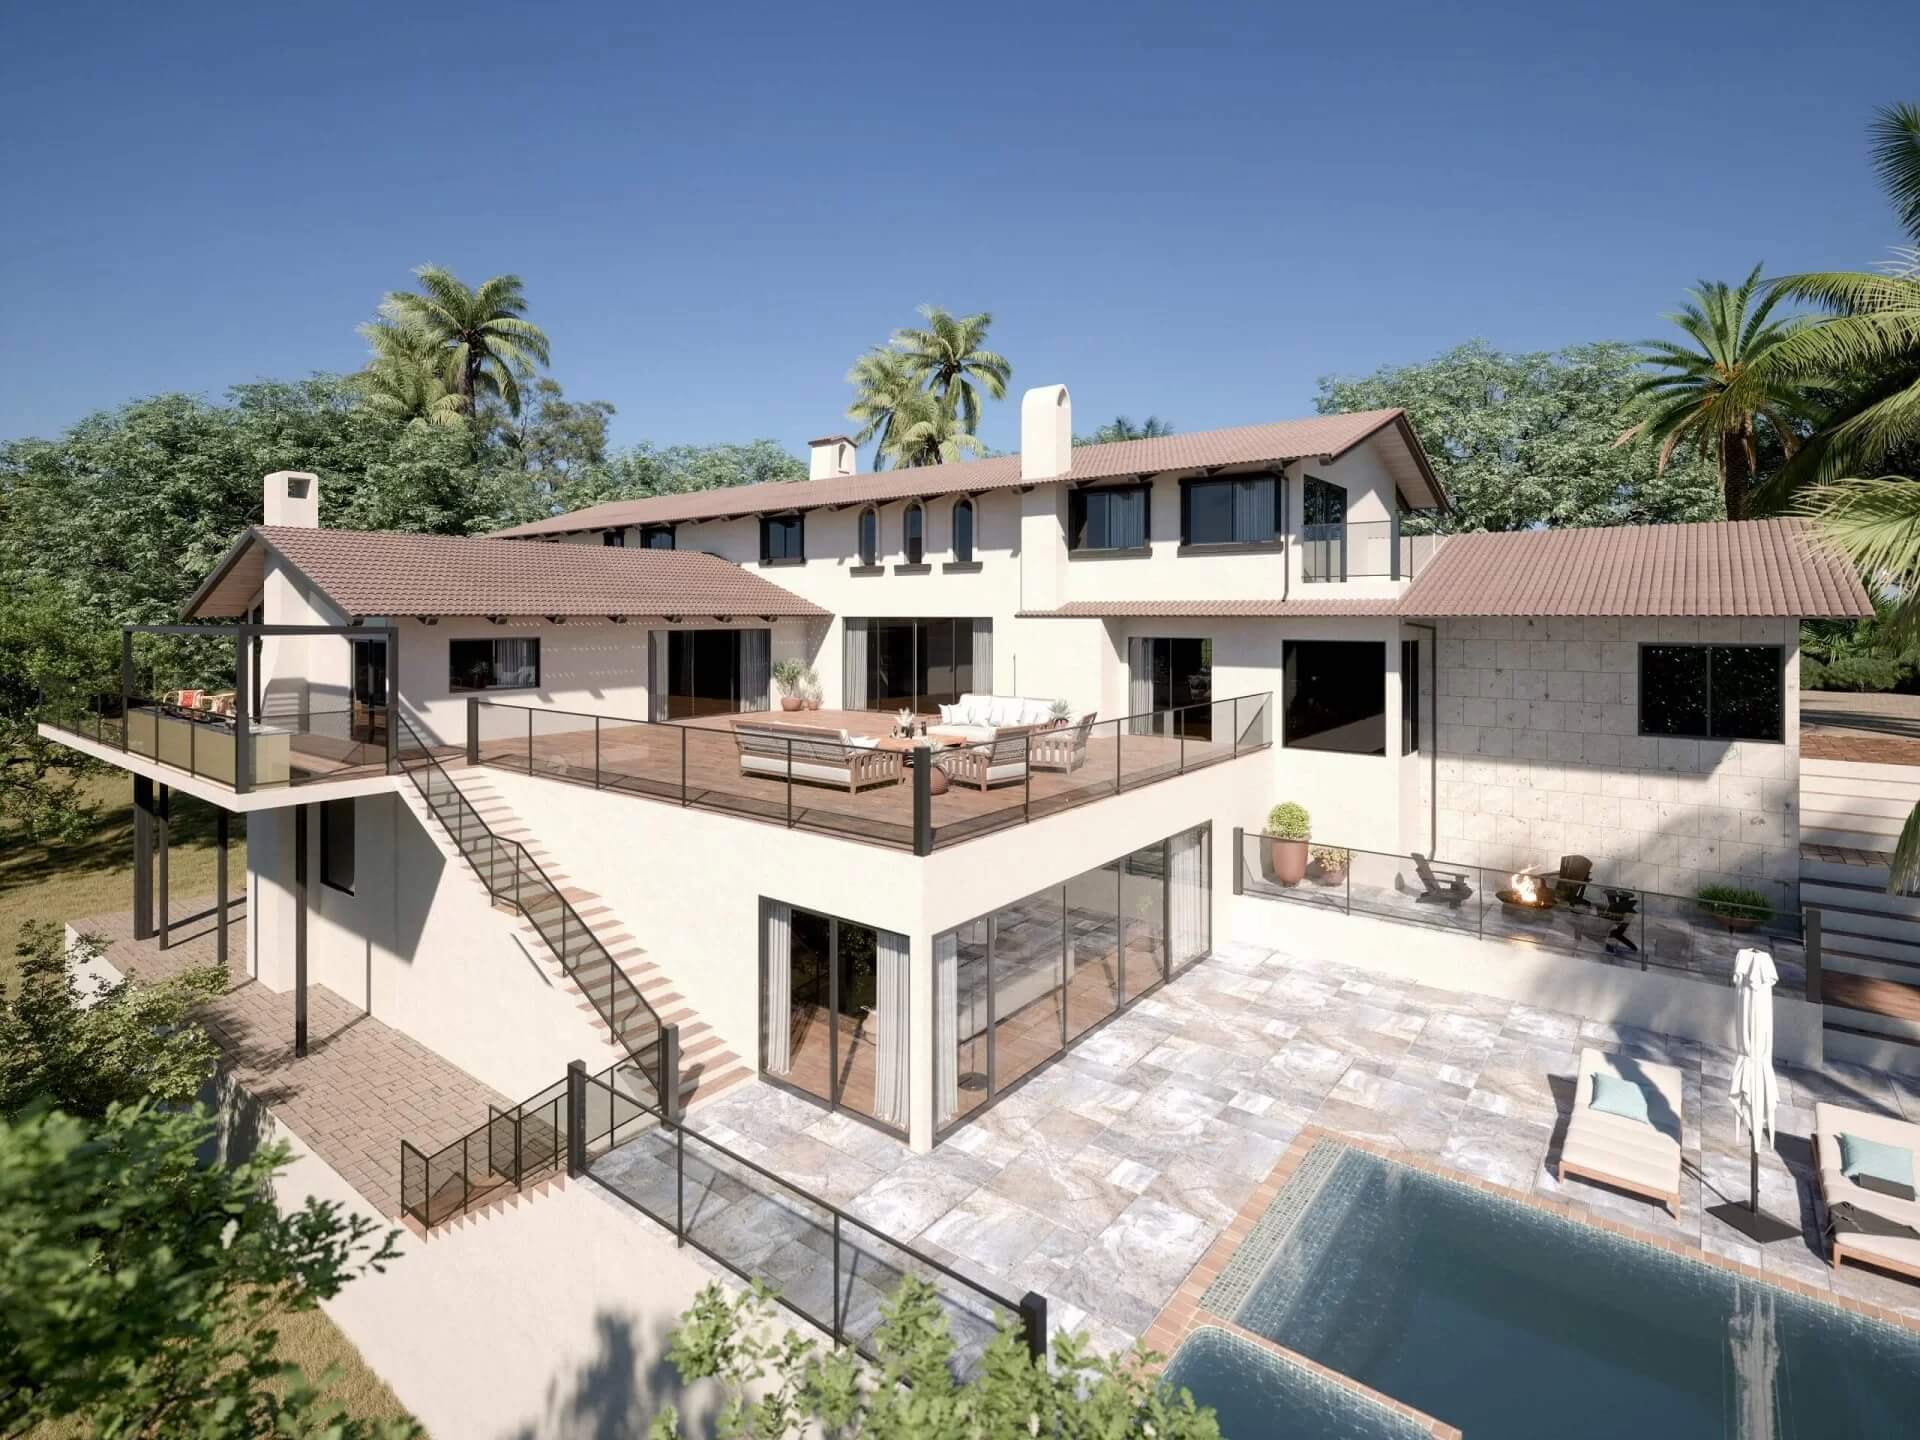 3D Rendering for a Residential Renovation Project in Los Gatos, California